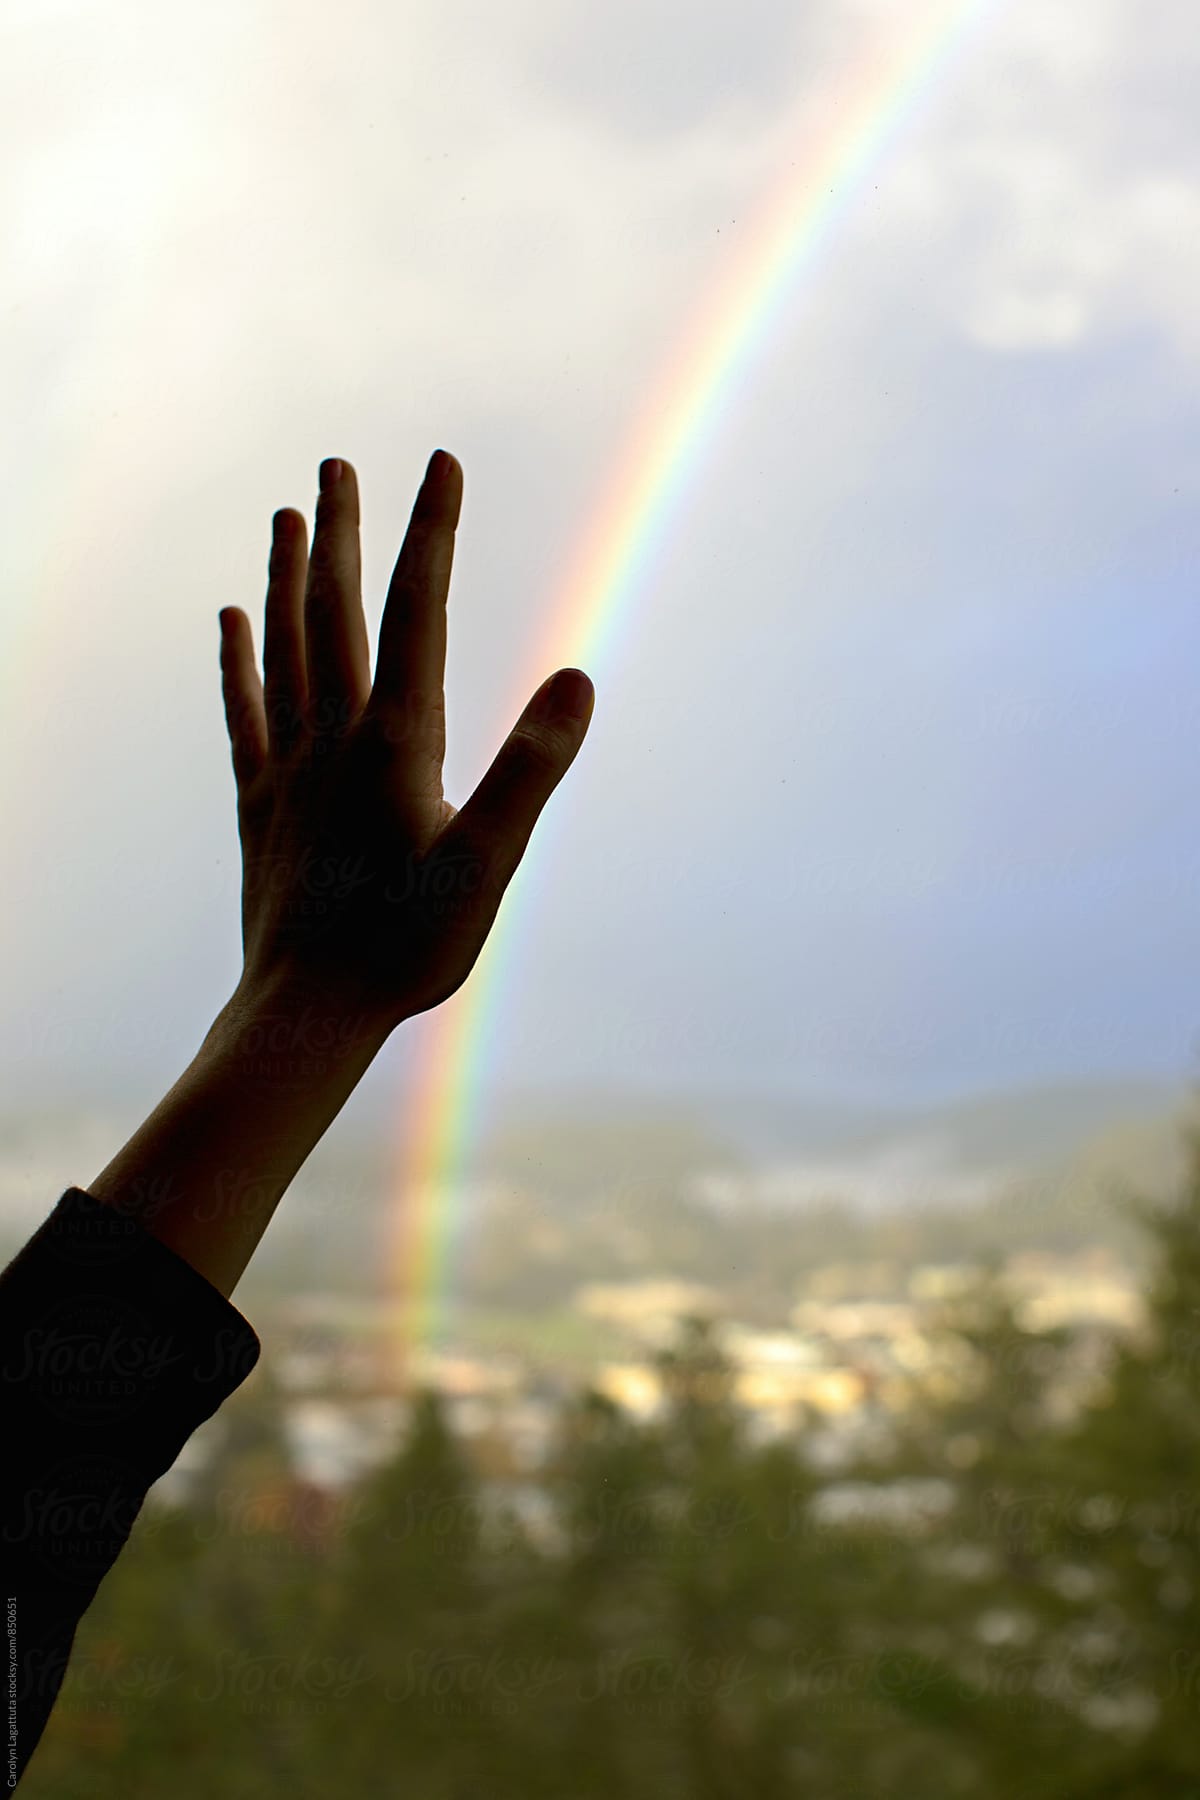 Hand pressed up against a window with a view of a valley and a bright rainbow